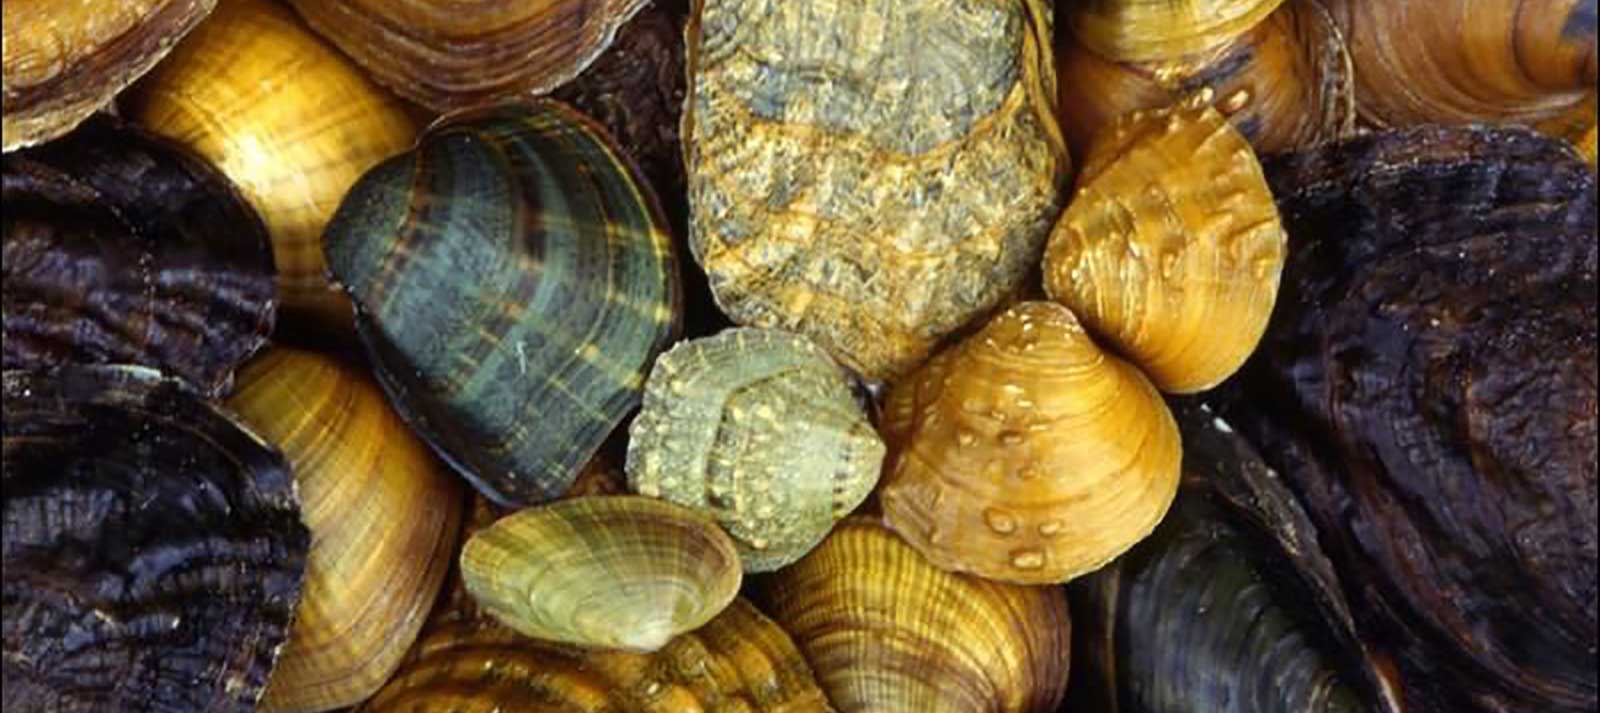 freshwater mussels | arkive.org